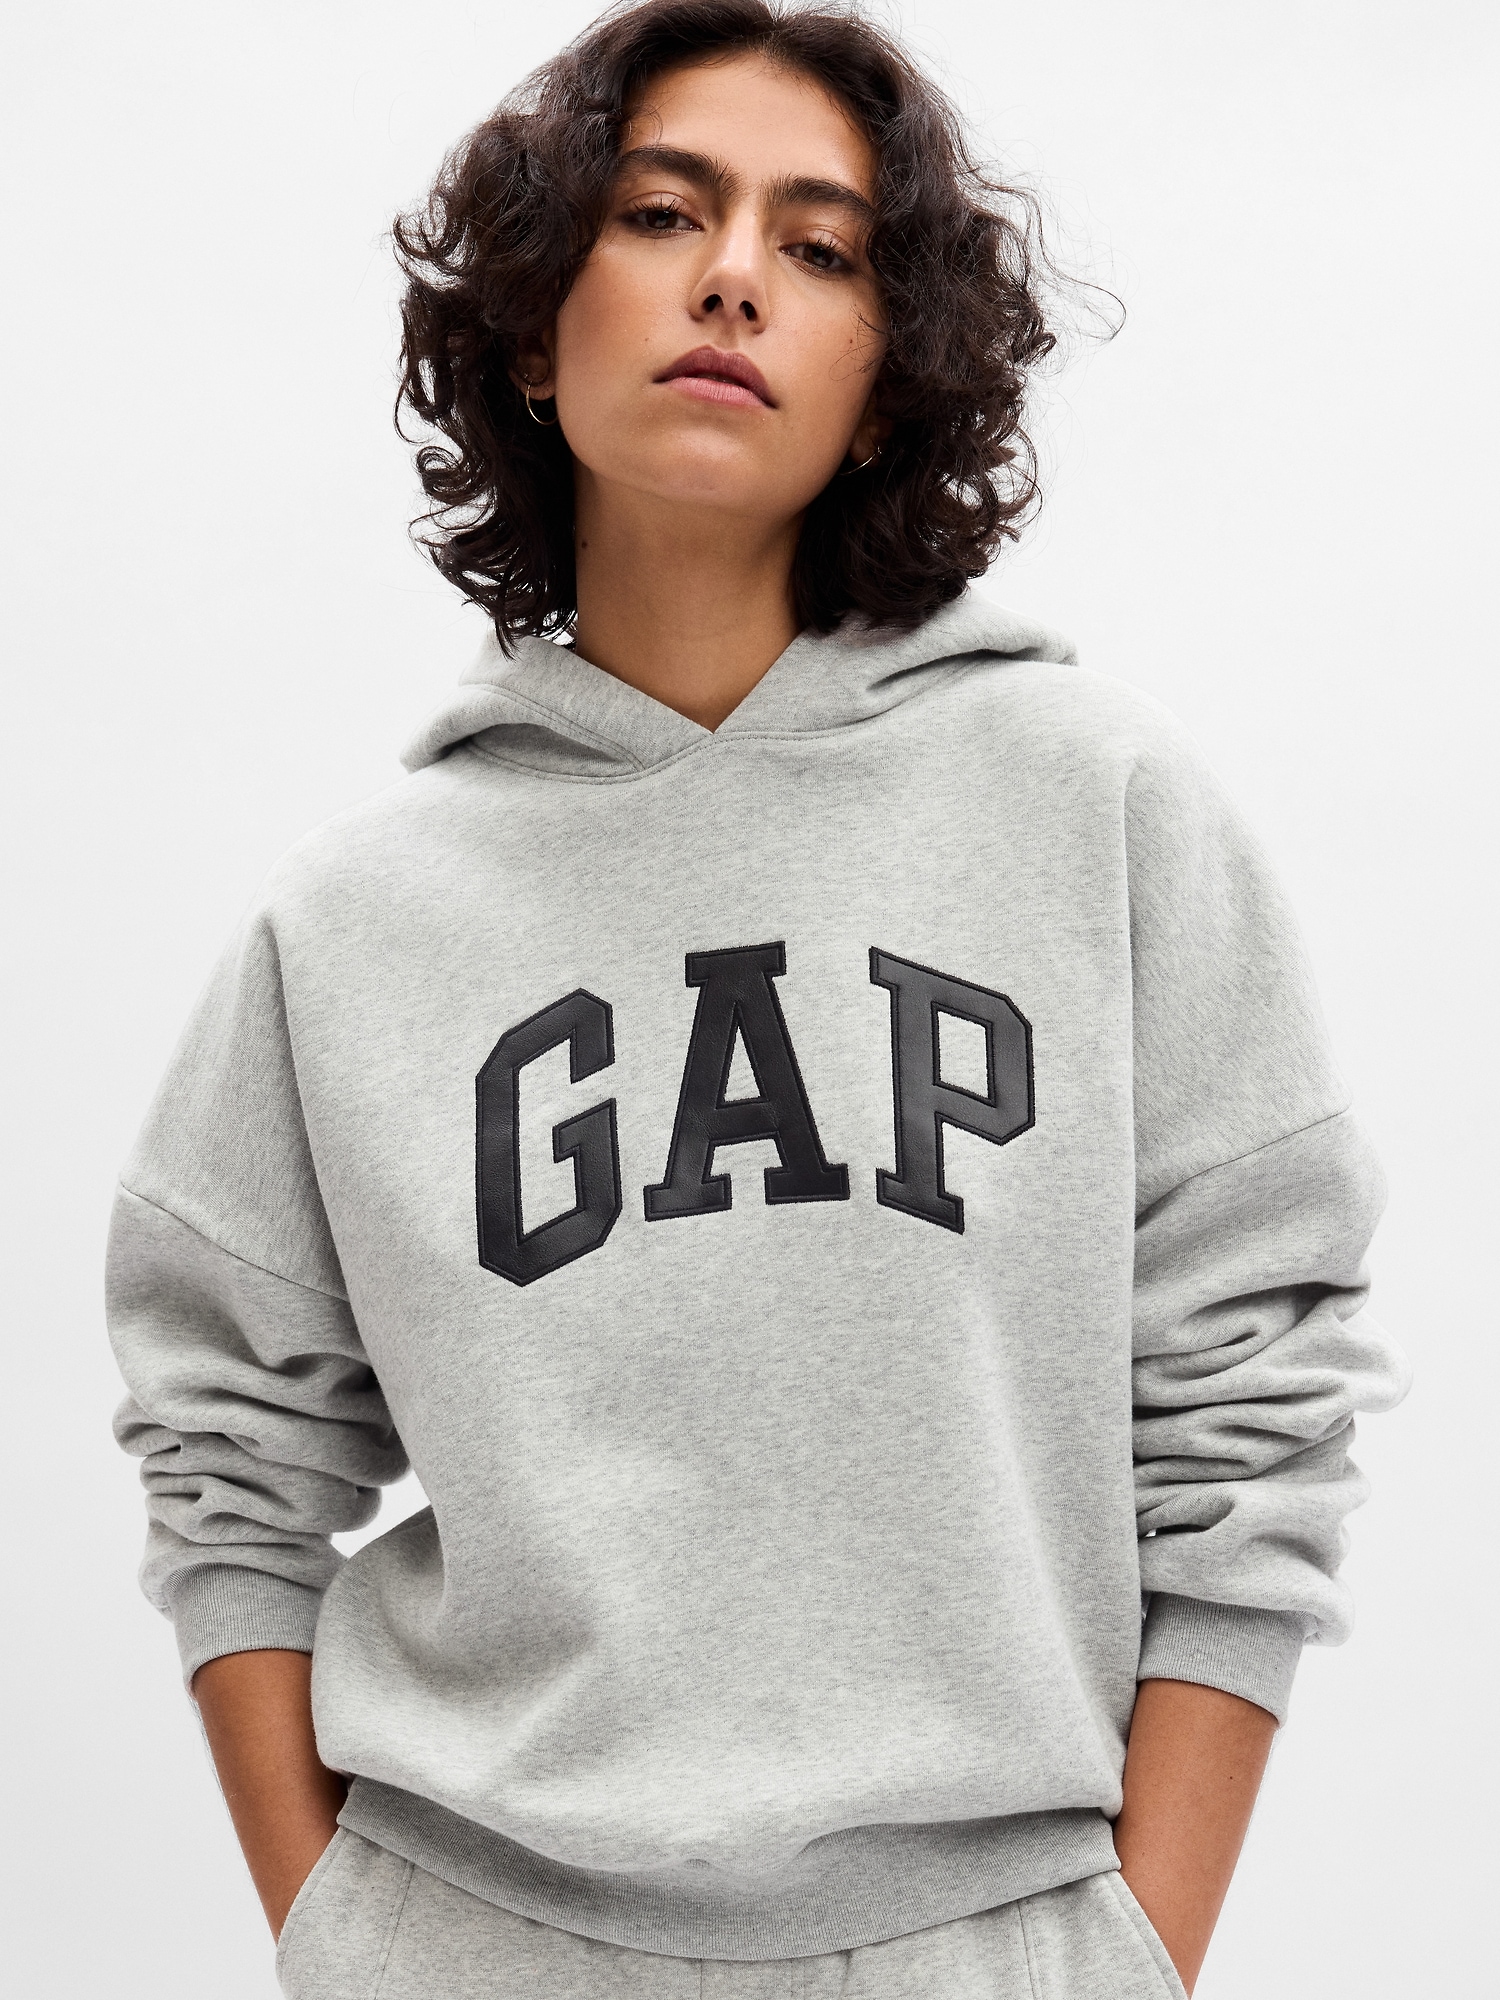 The Gap: See 3 decades of vintage Gap clothes & how the company